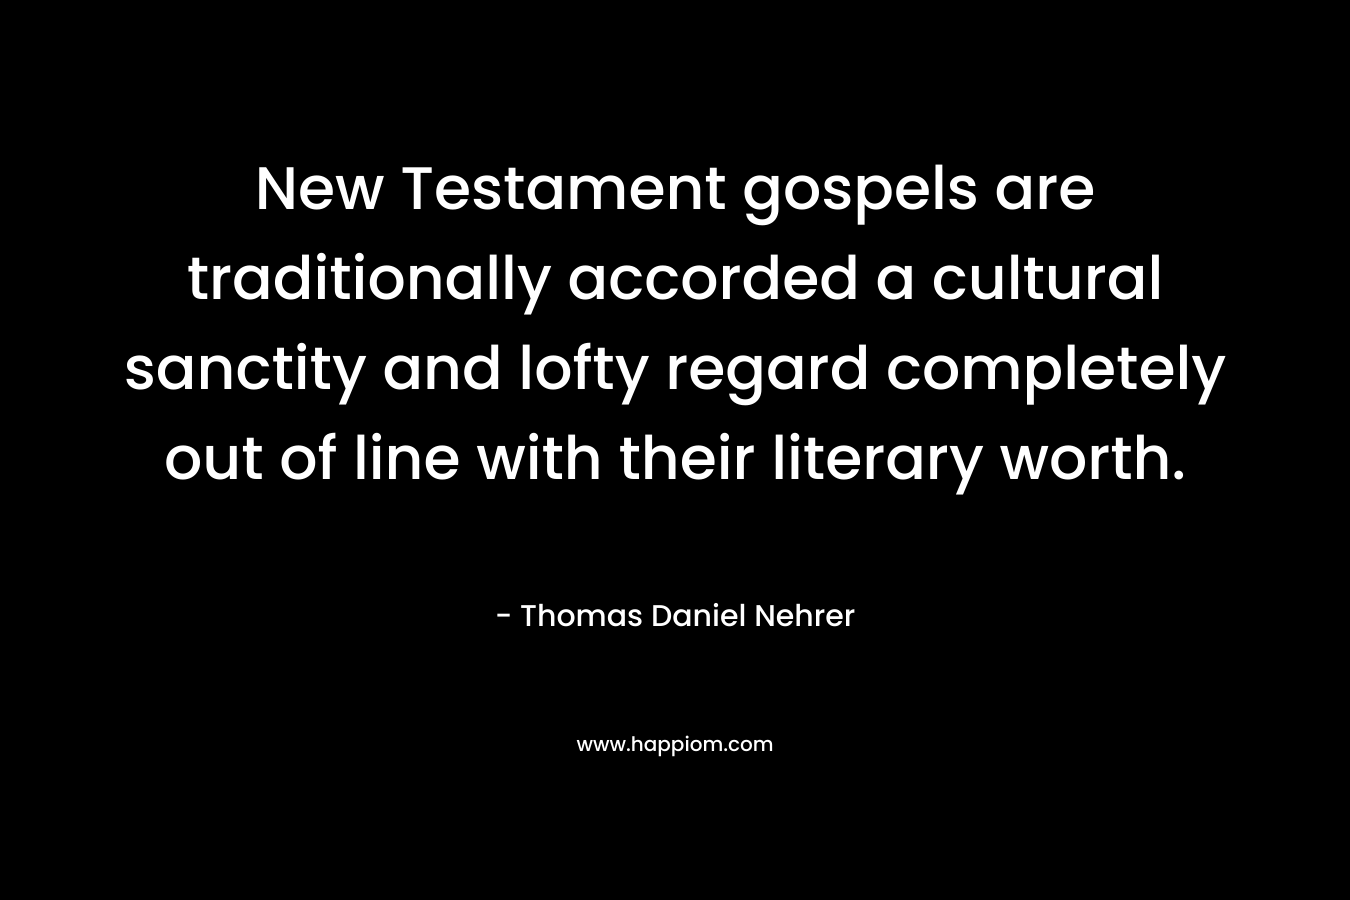 New Testament gospels are traditionally accorded a cultural sanctity and lofty regard completely out of line with their literary worth. – Thomas Daniel Nehrer